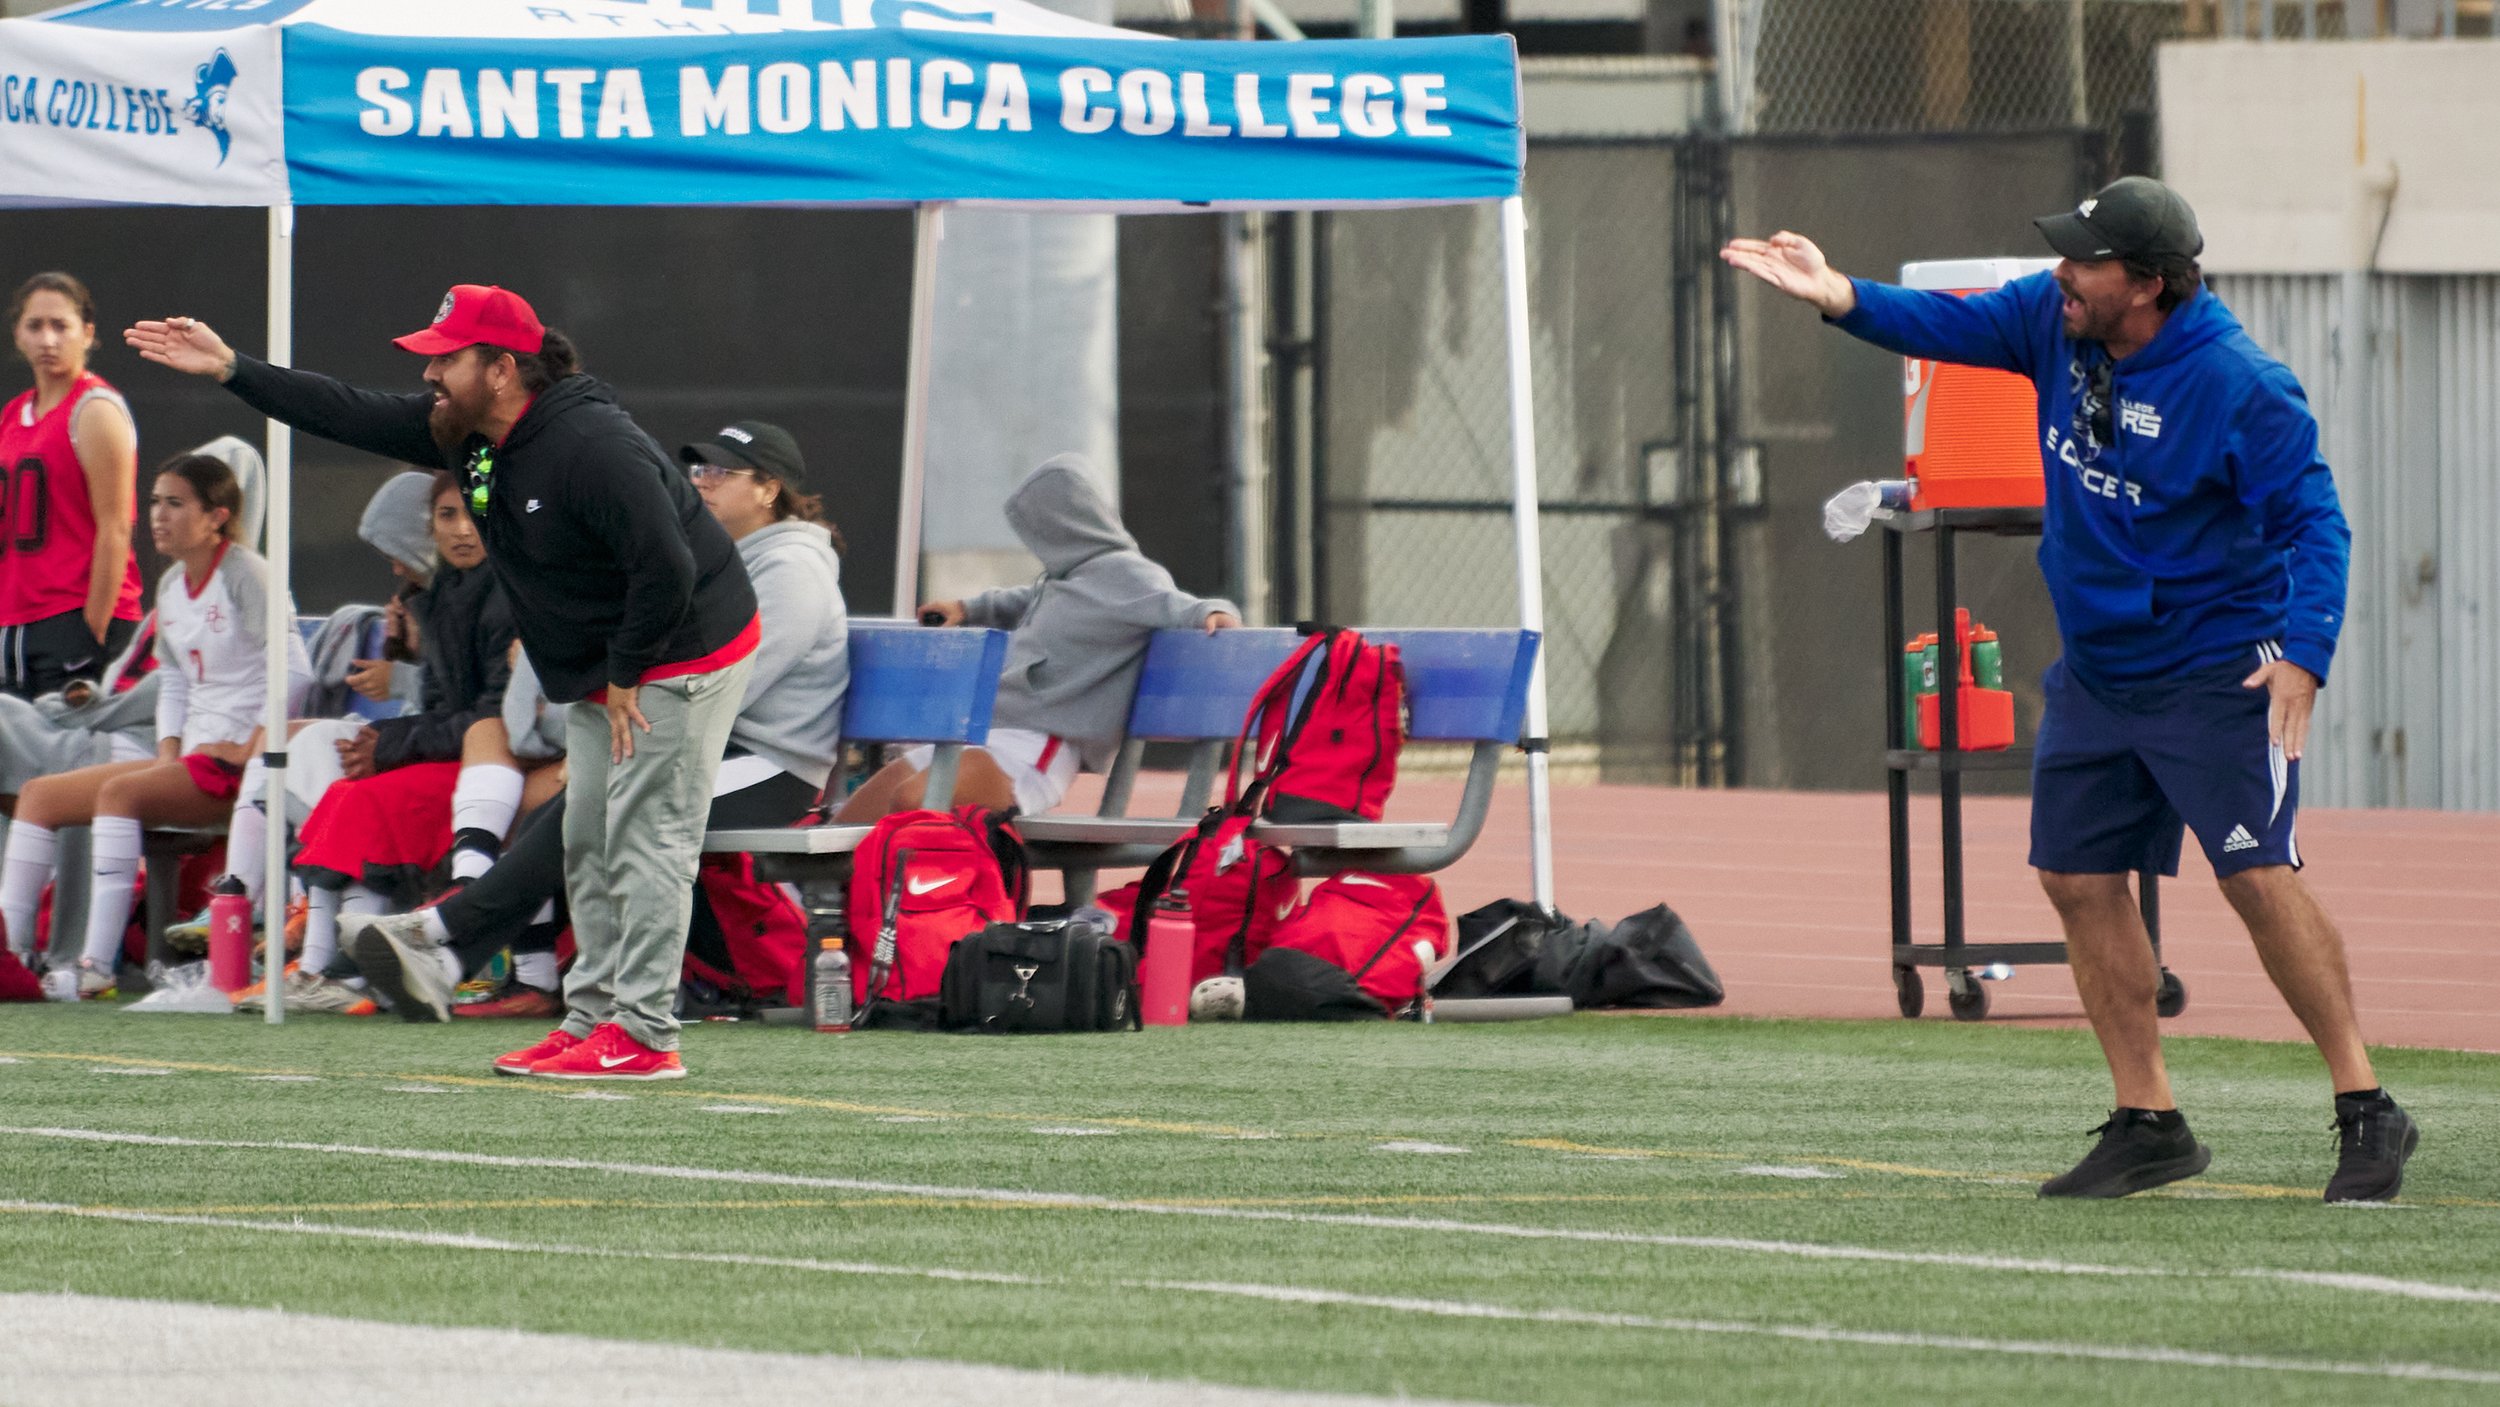  Bakersfield College Renegades Women's Soccer Head Coach Egar Linares and Santa Monica College Corsairs Women's Soccer Head Coach Aaron Benditson call out to players from the sideline during the women's soccer match on Friday, Oct. 20, 2022, at Corsa